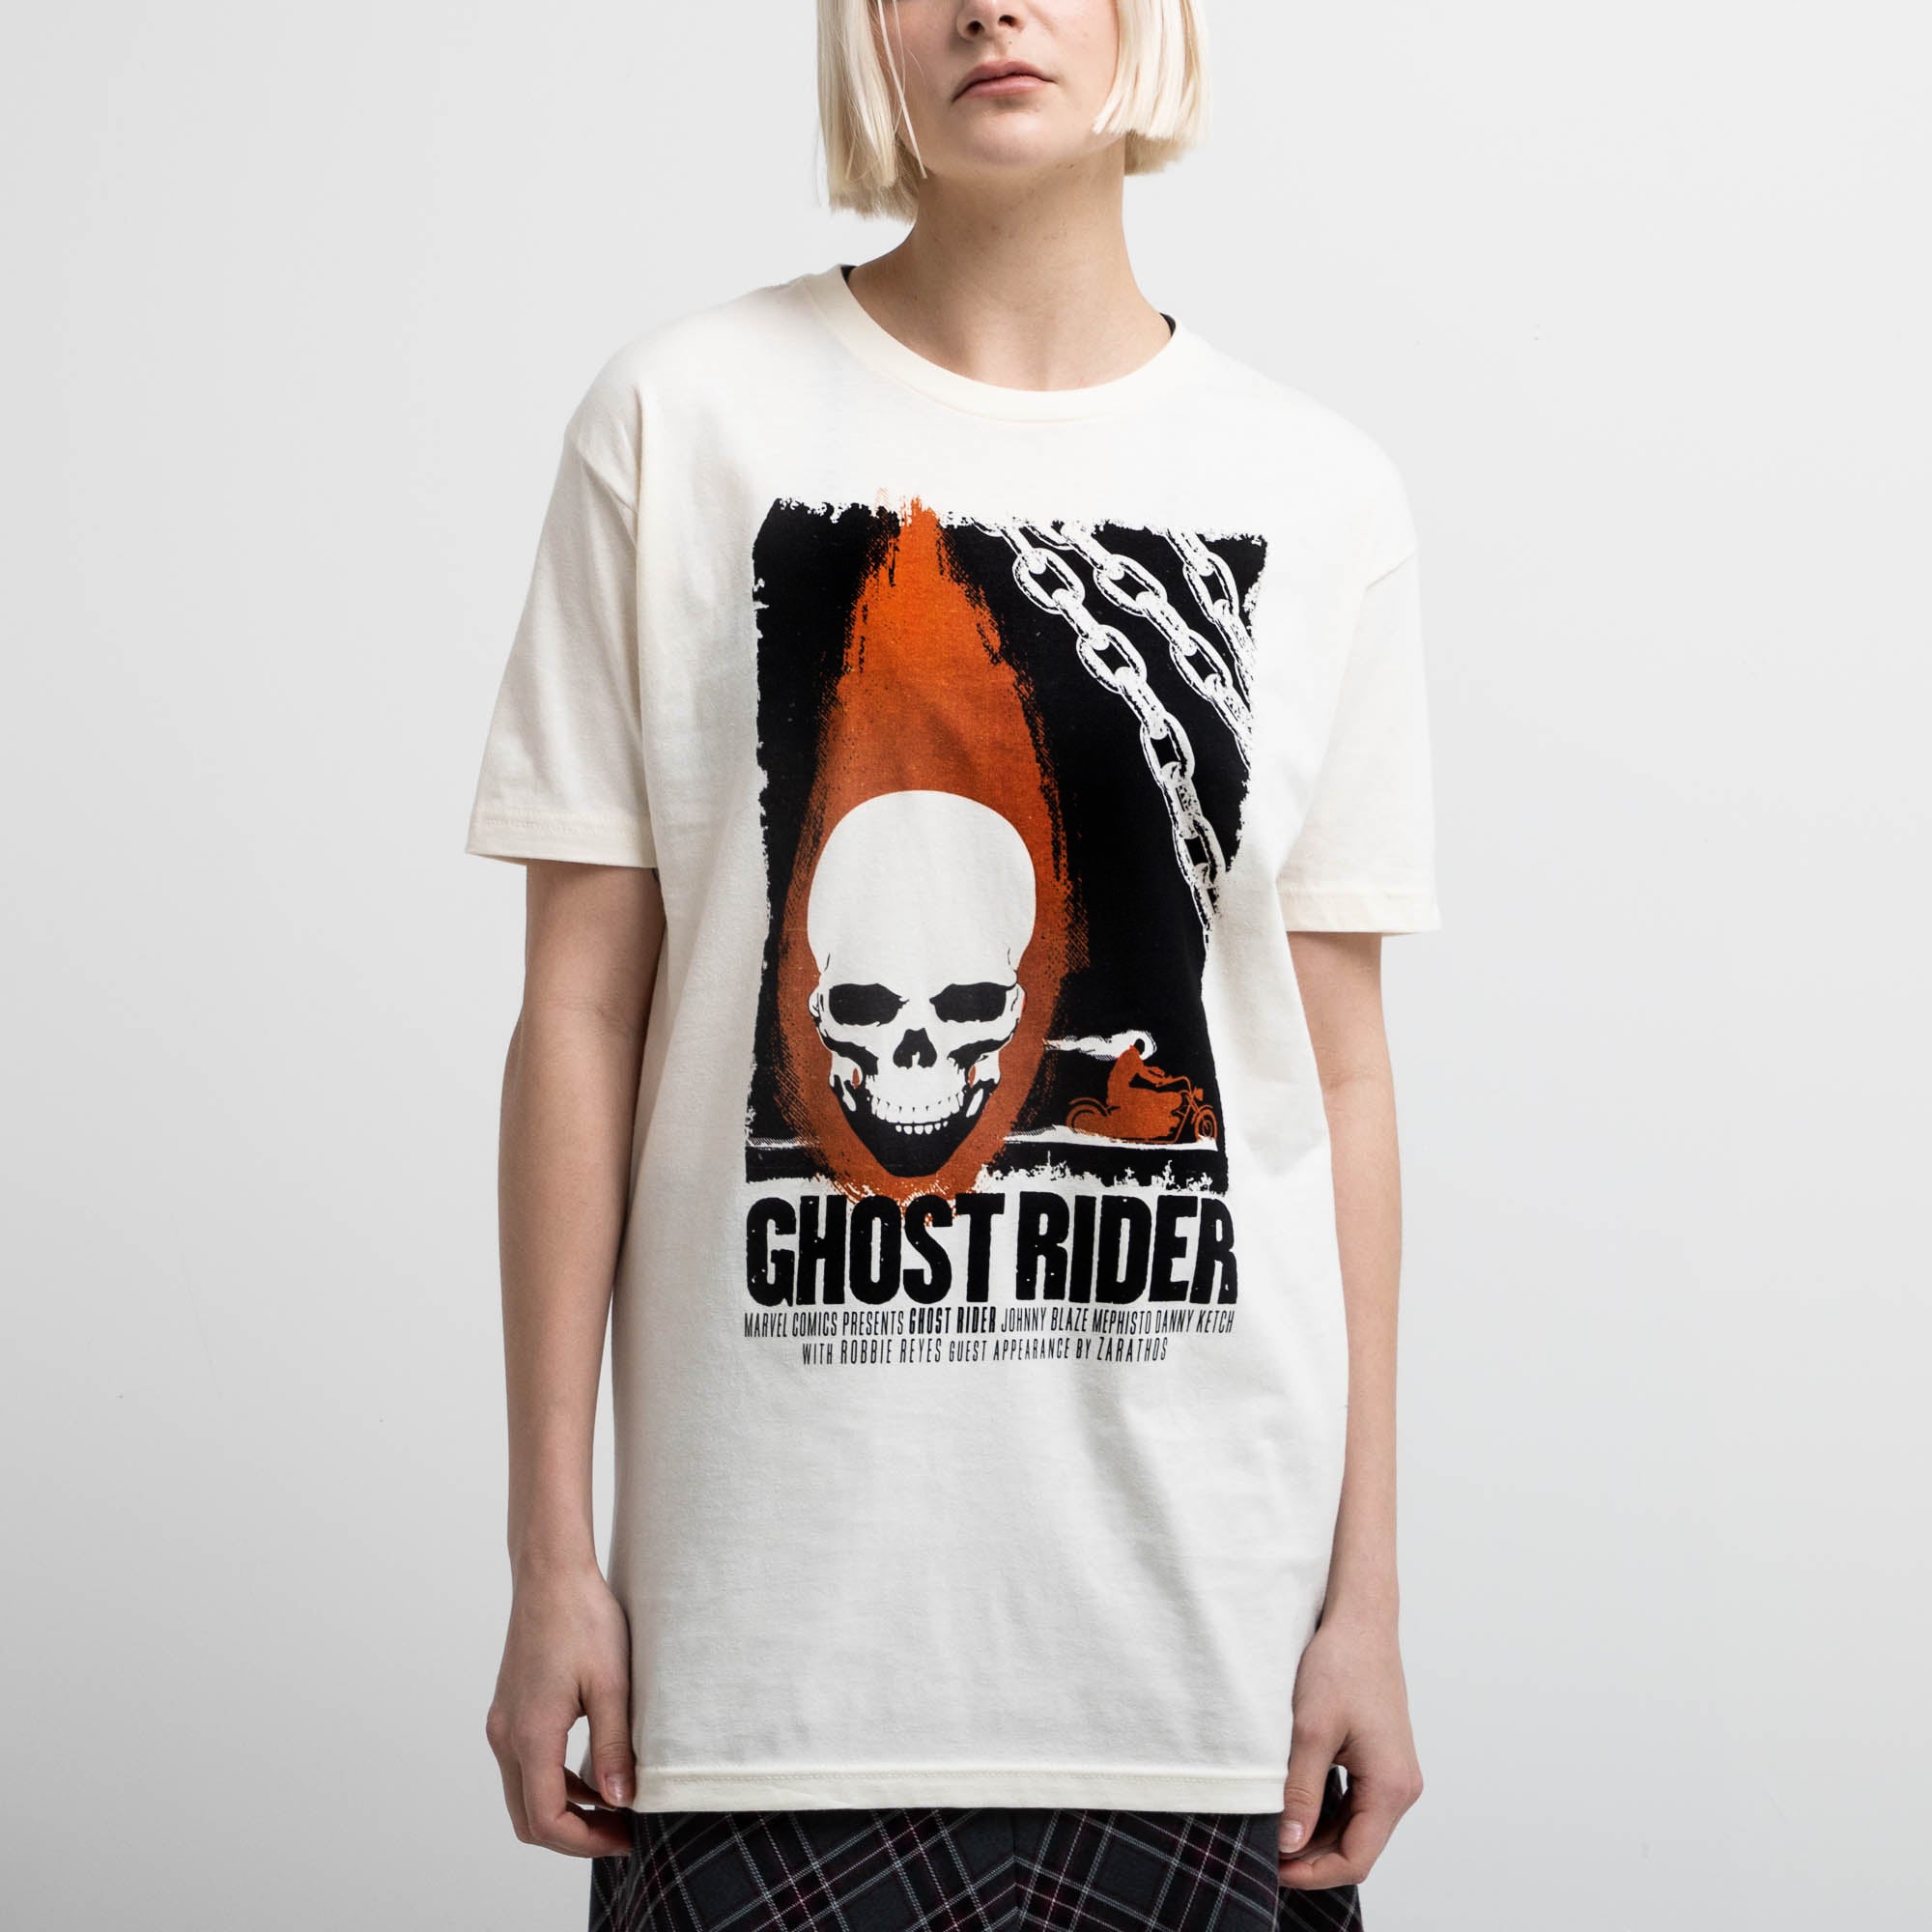 Ghost Rider Natural Grindhouse Poster Tee